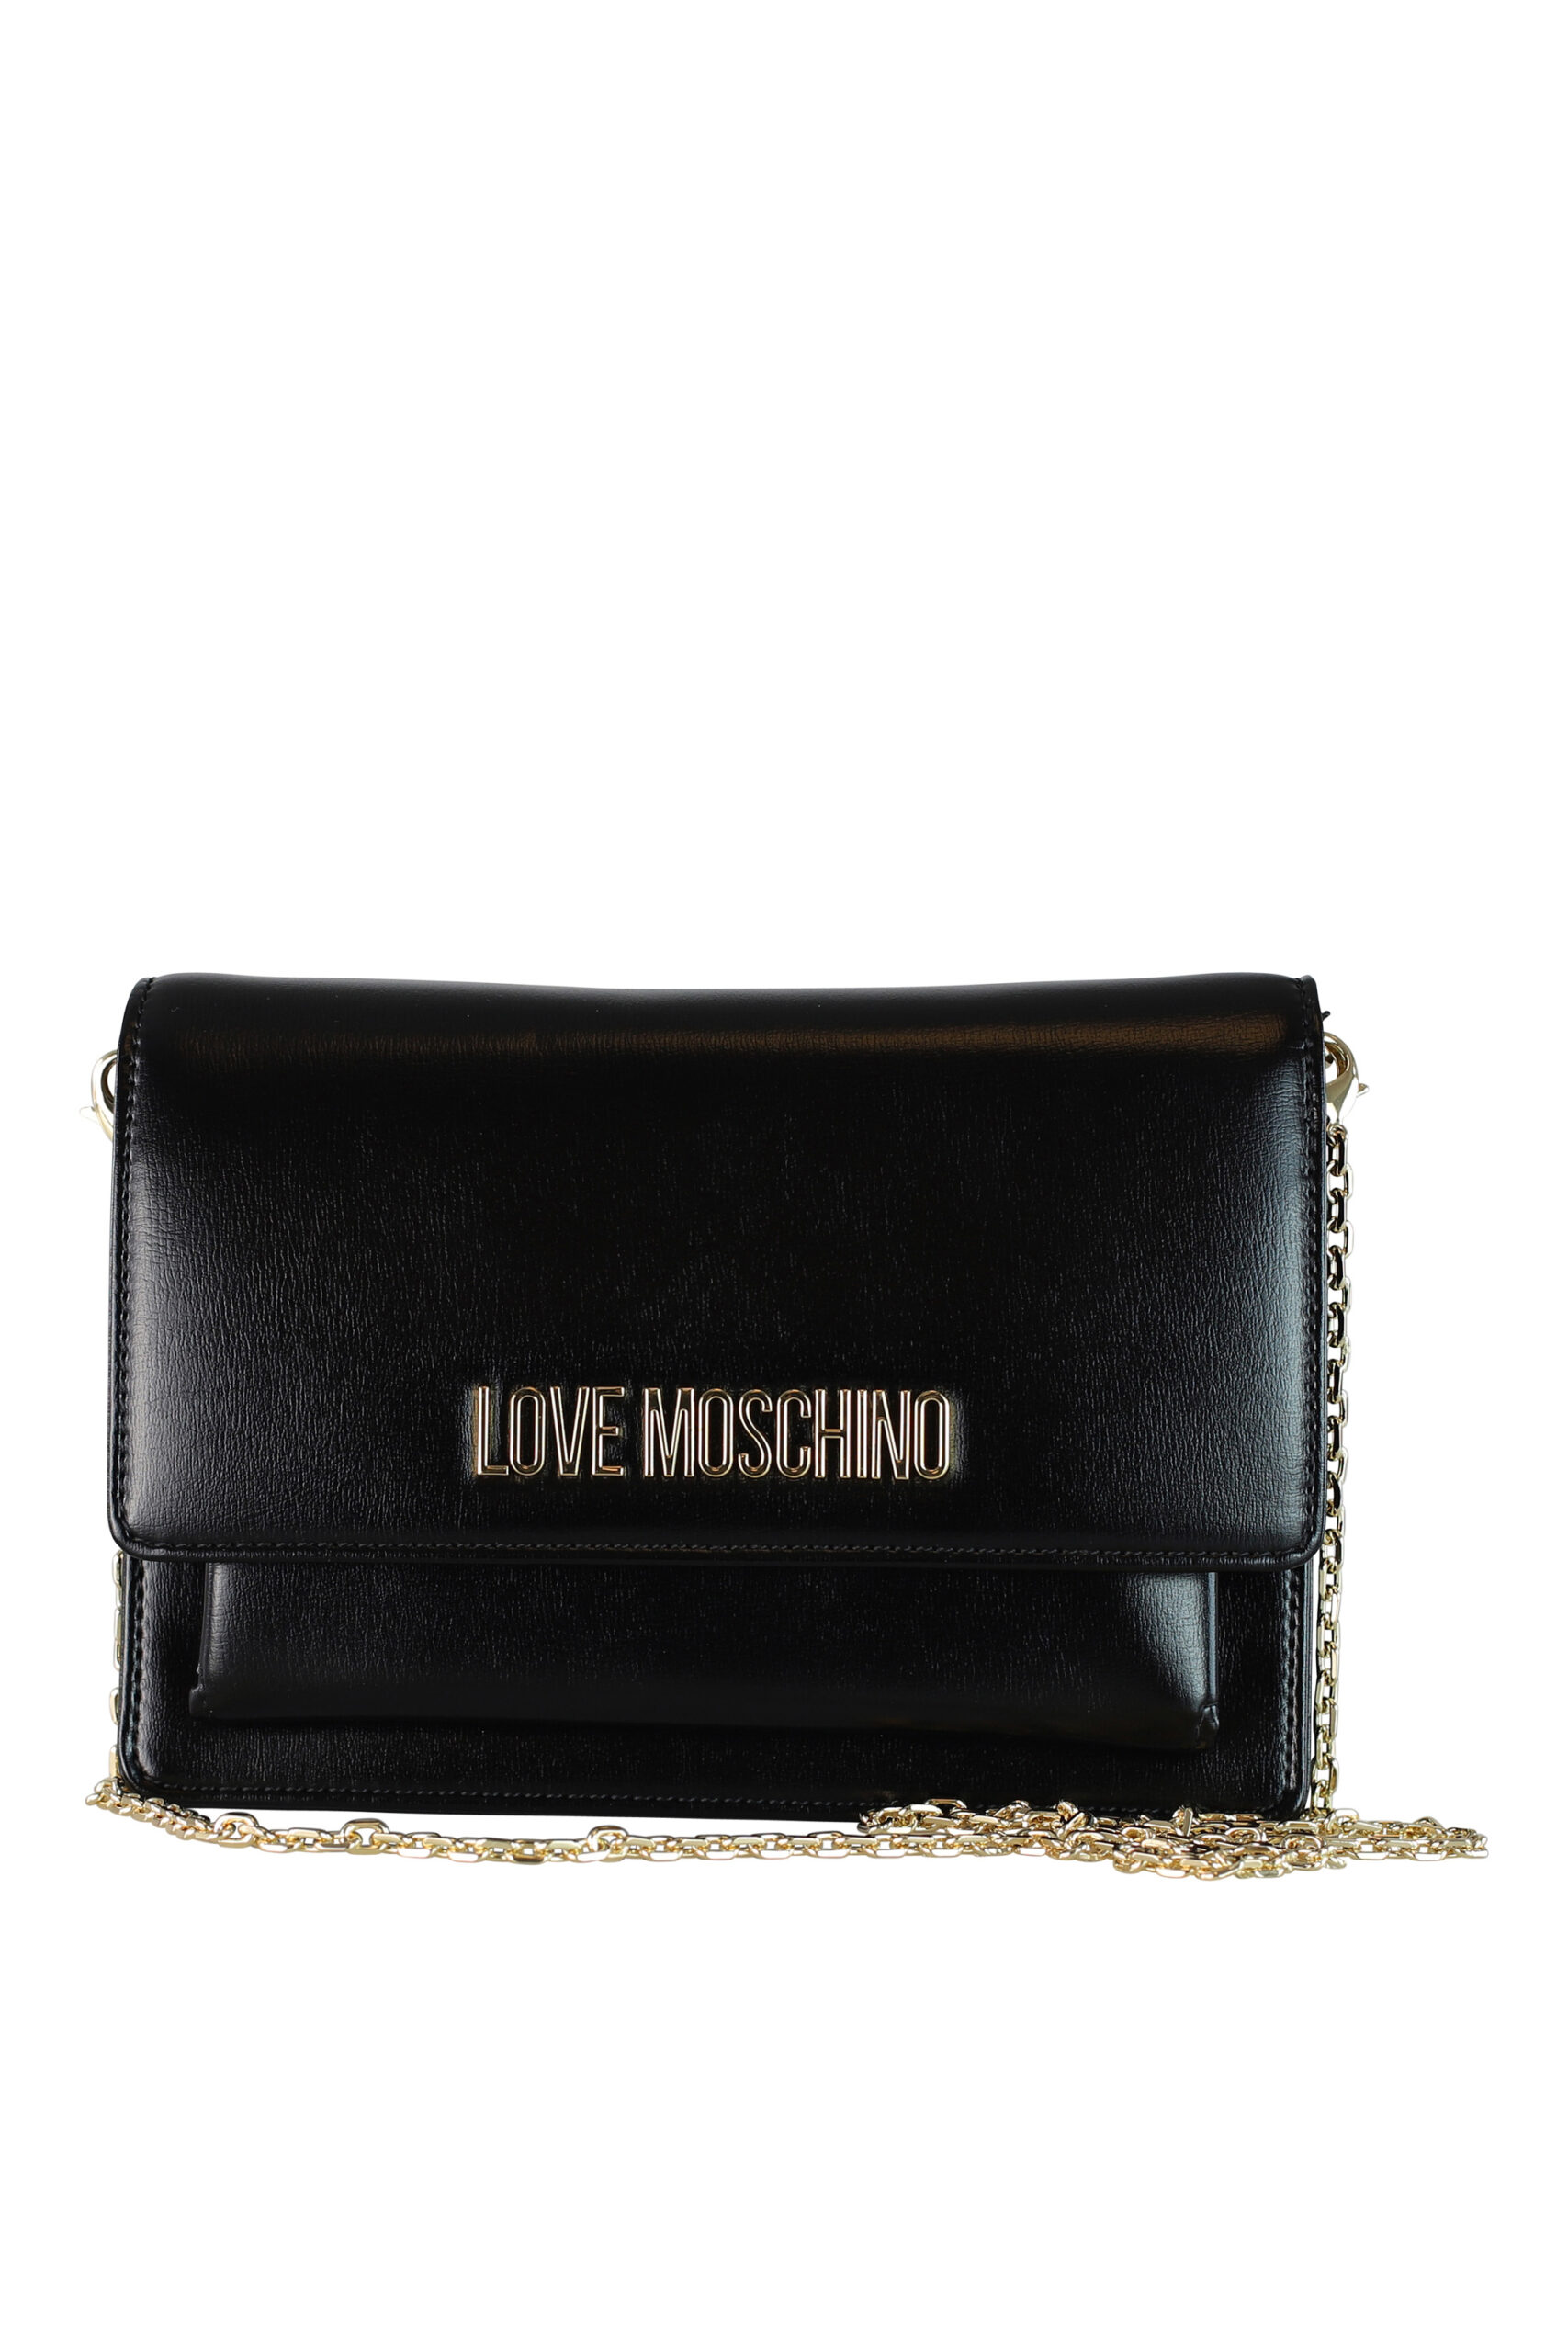 Love Moschino Logo-lettering Chain-linked Shoulder Bag in Black | Lyst